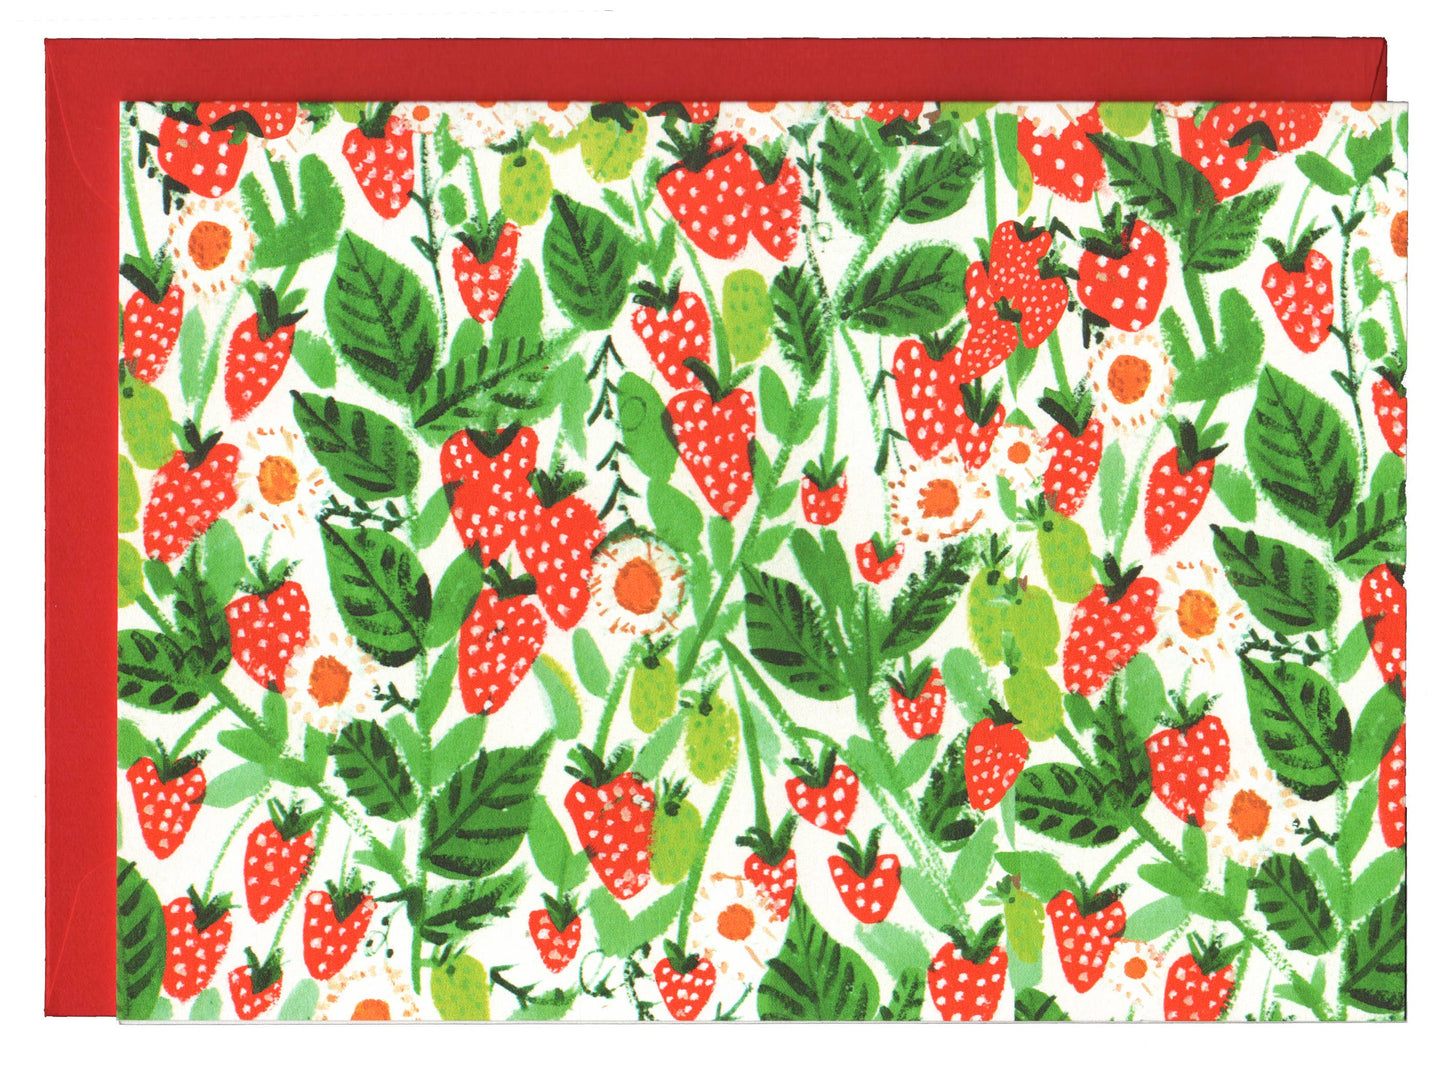 Notecard with wild, field strawberries as the design 